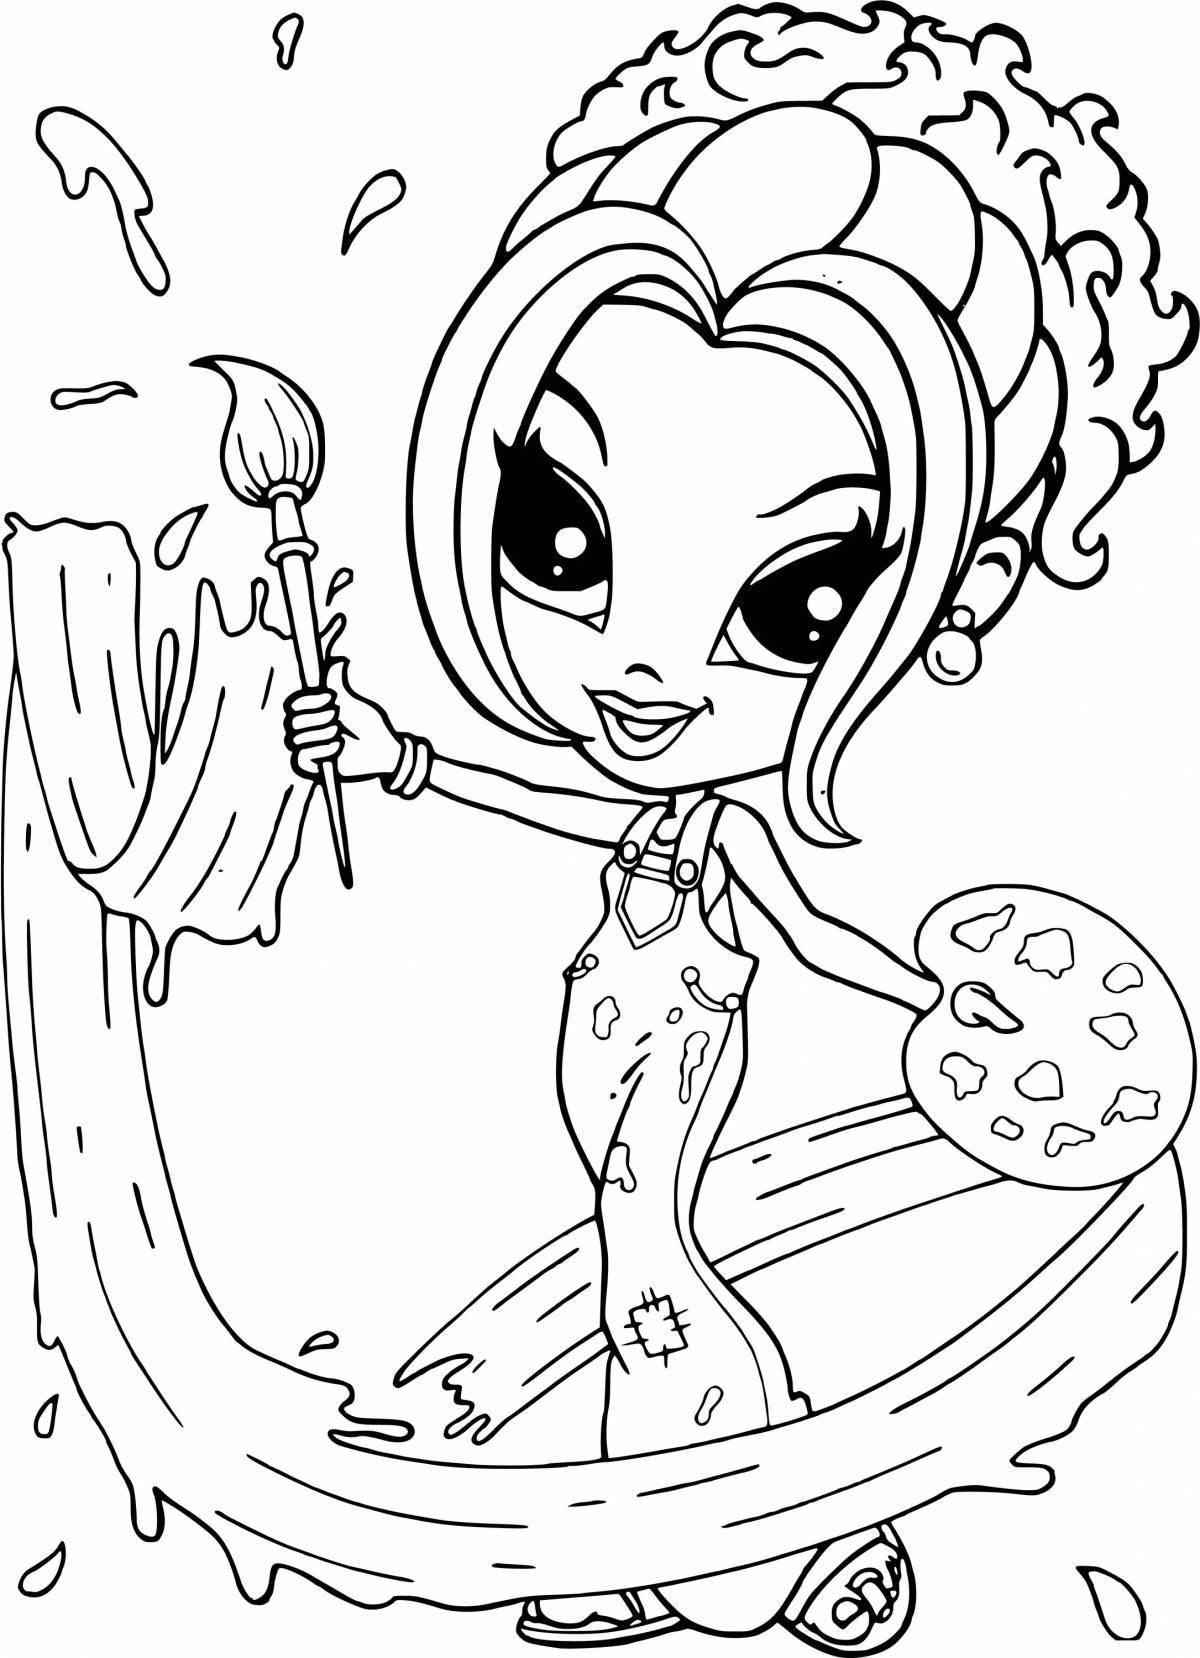 Amazing coloring pages popular with girls